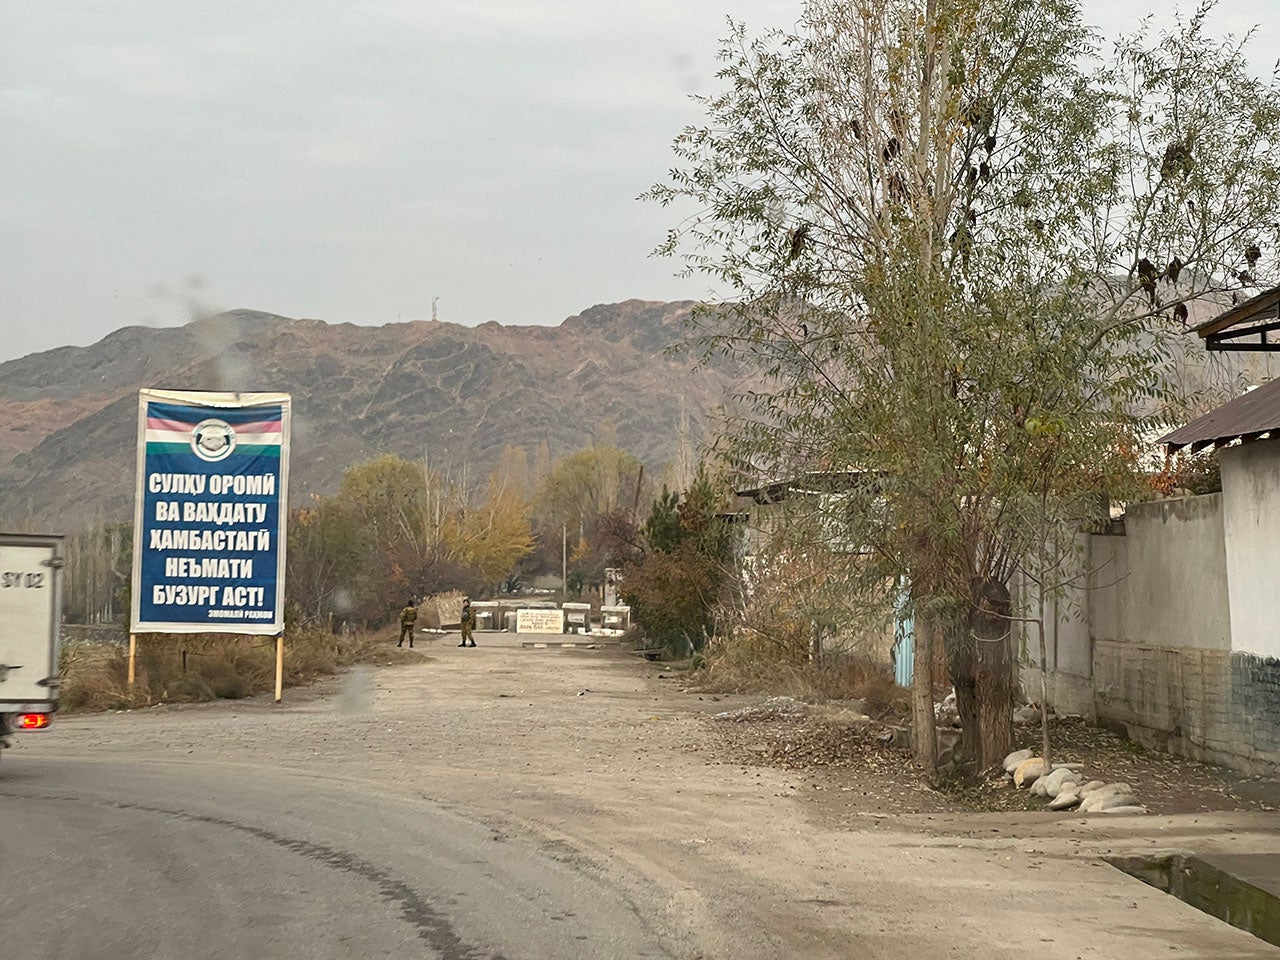 The de-facto border point separating the Tajik village of Chorbog from the Kyrgyz village of Dostuk (Batken district). The border point was under the control of Kyrgyz forces when two Tajik ambulances and a car with civilians came under attack on September 16, 2022.